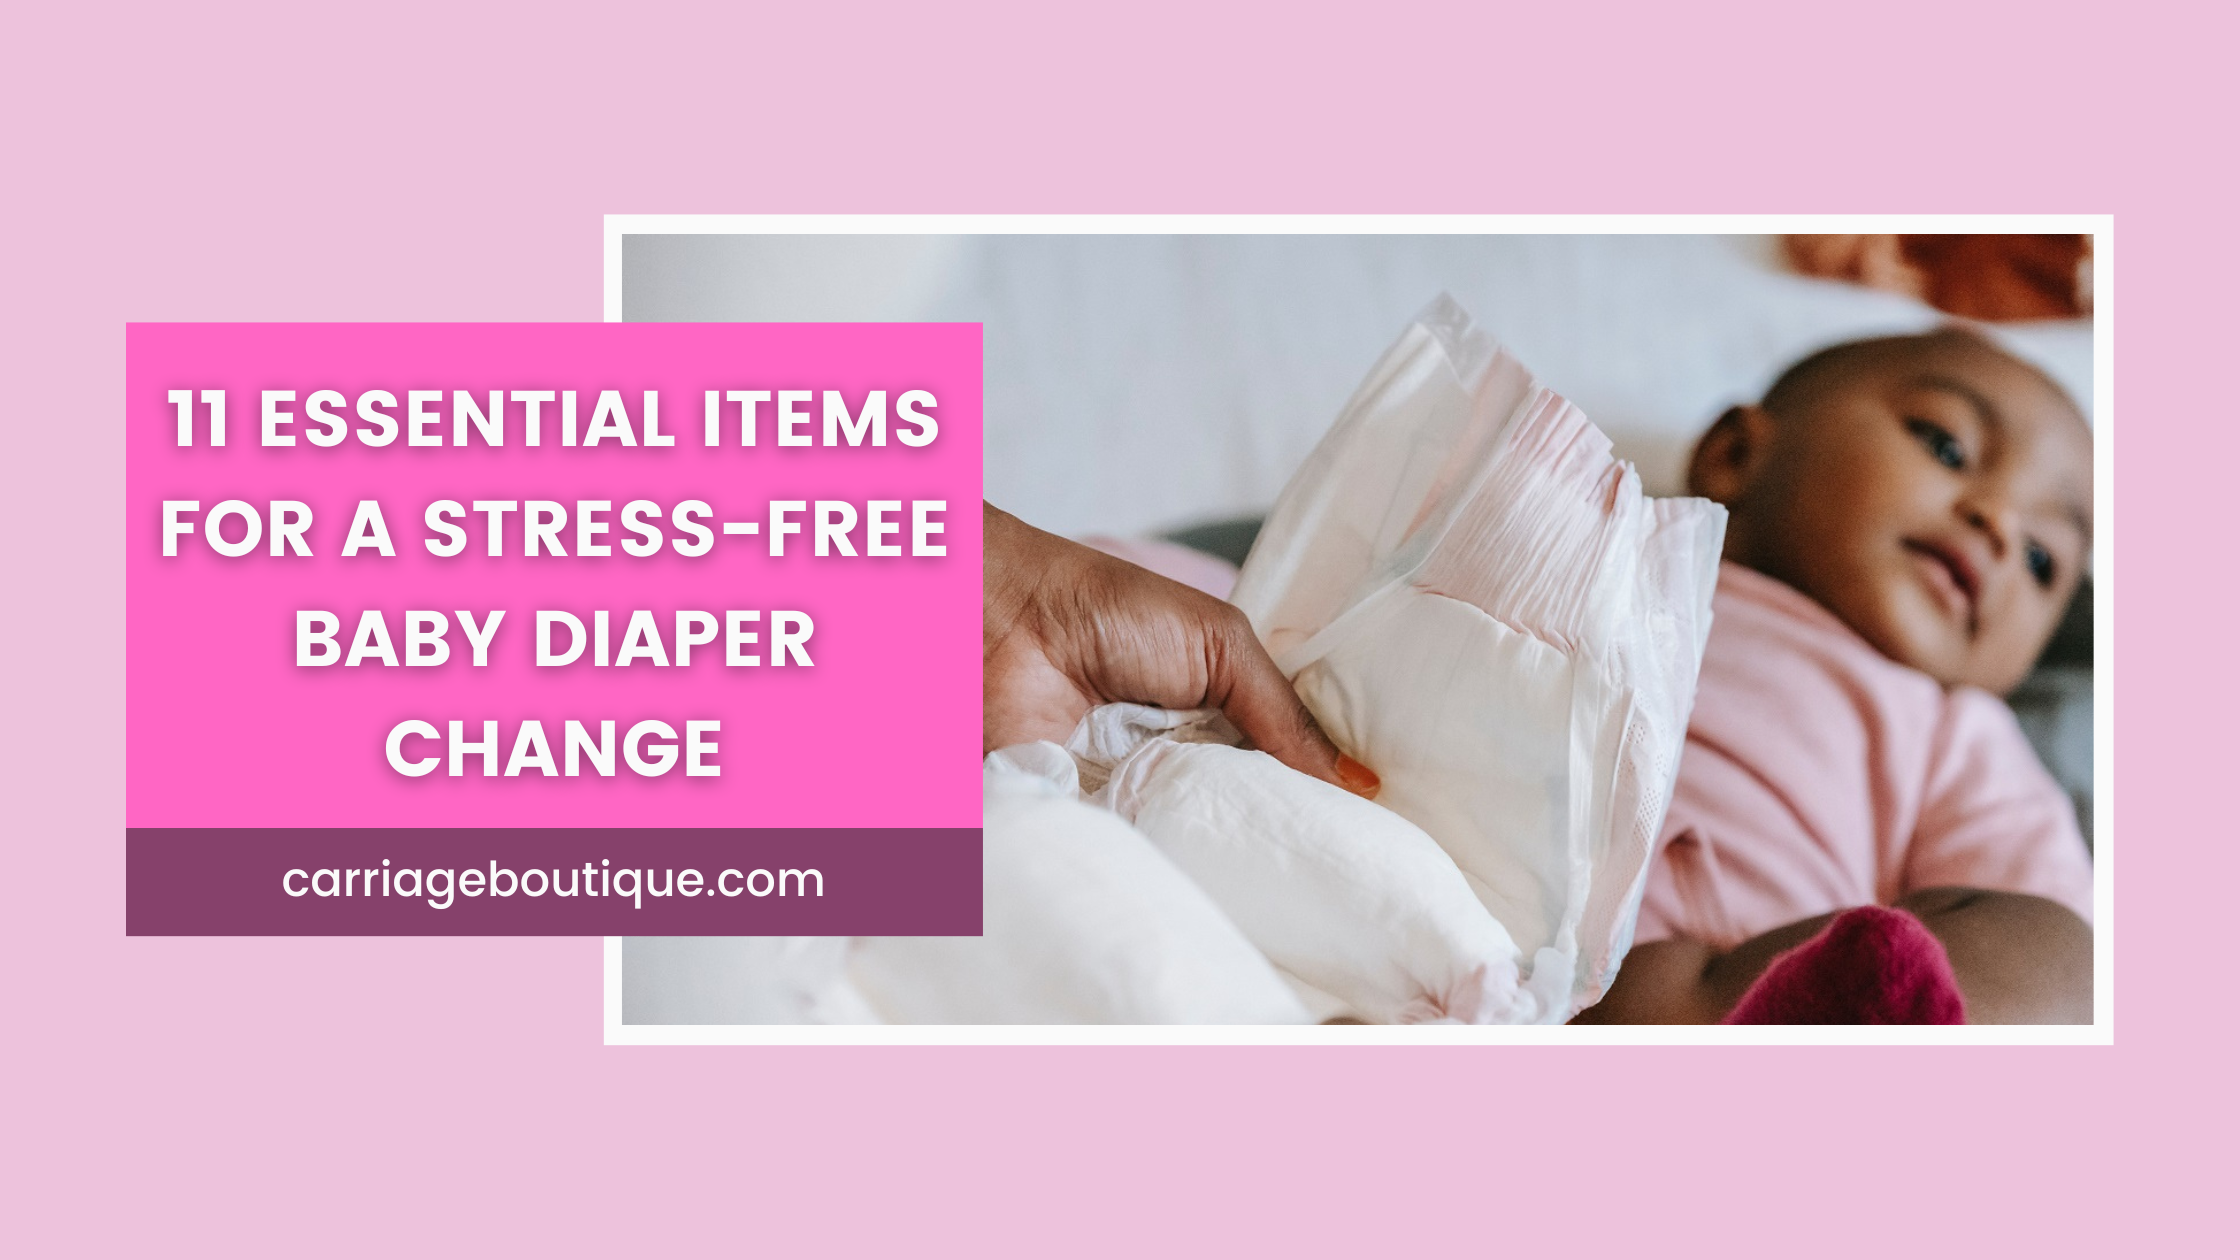 11 Essential Items for a Stress-Free Baby Diaper Change – Carriage Boutique